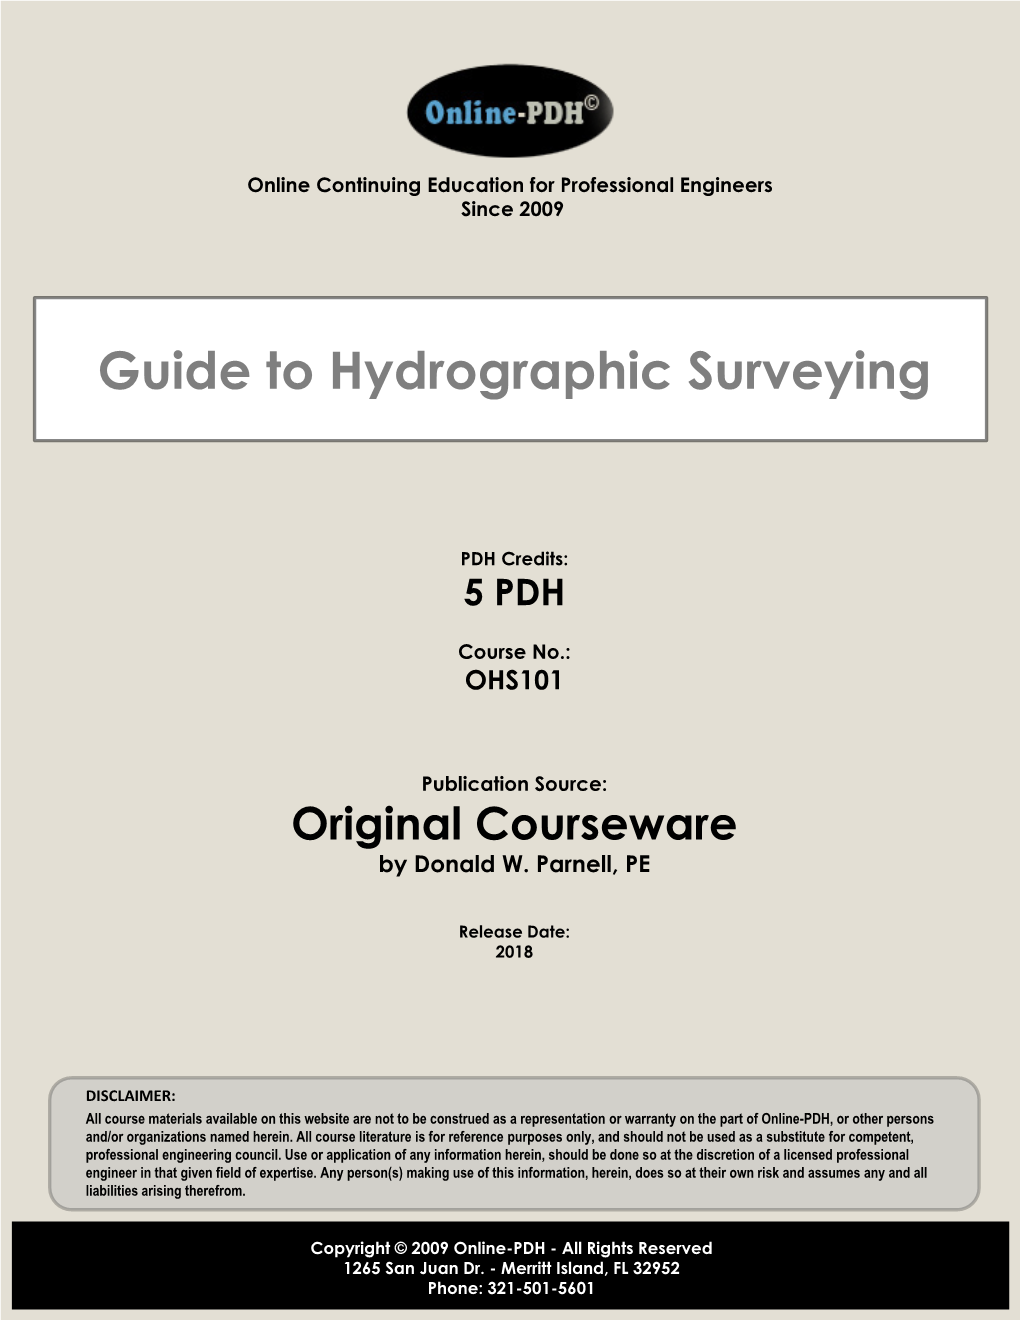 Guide to Hydrographic Surveying